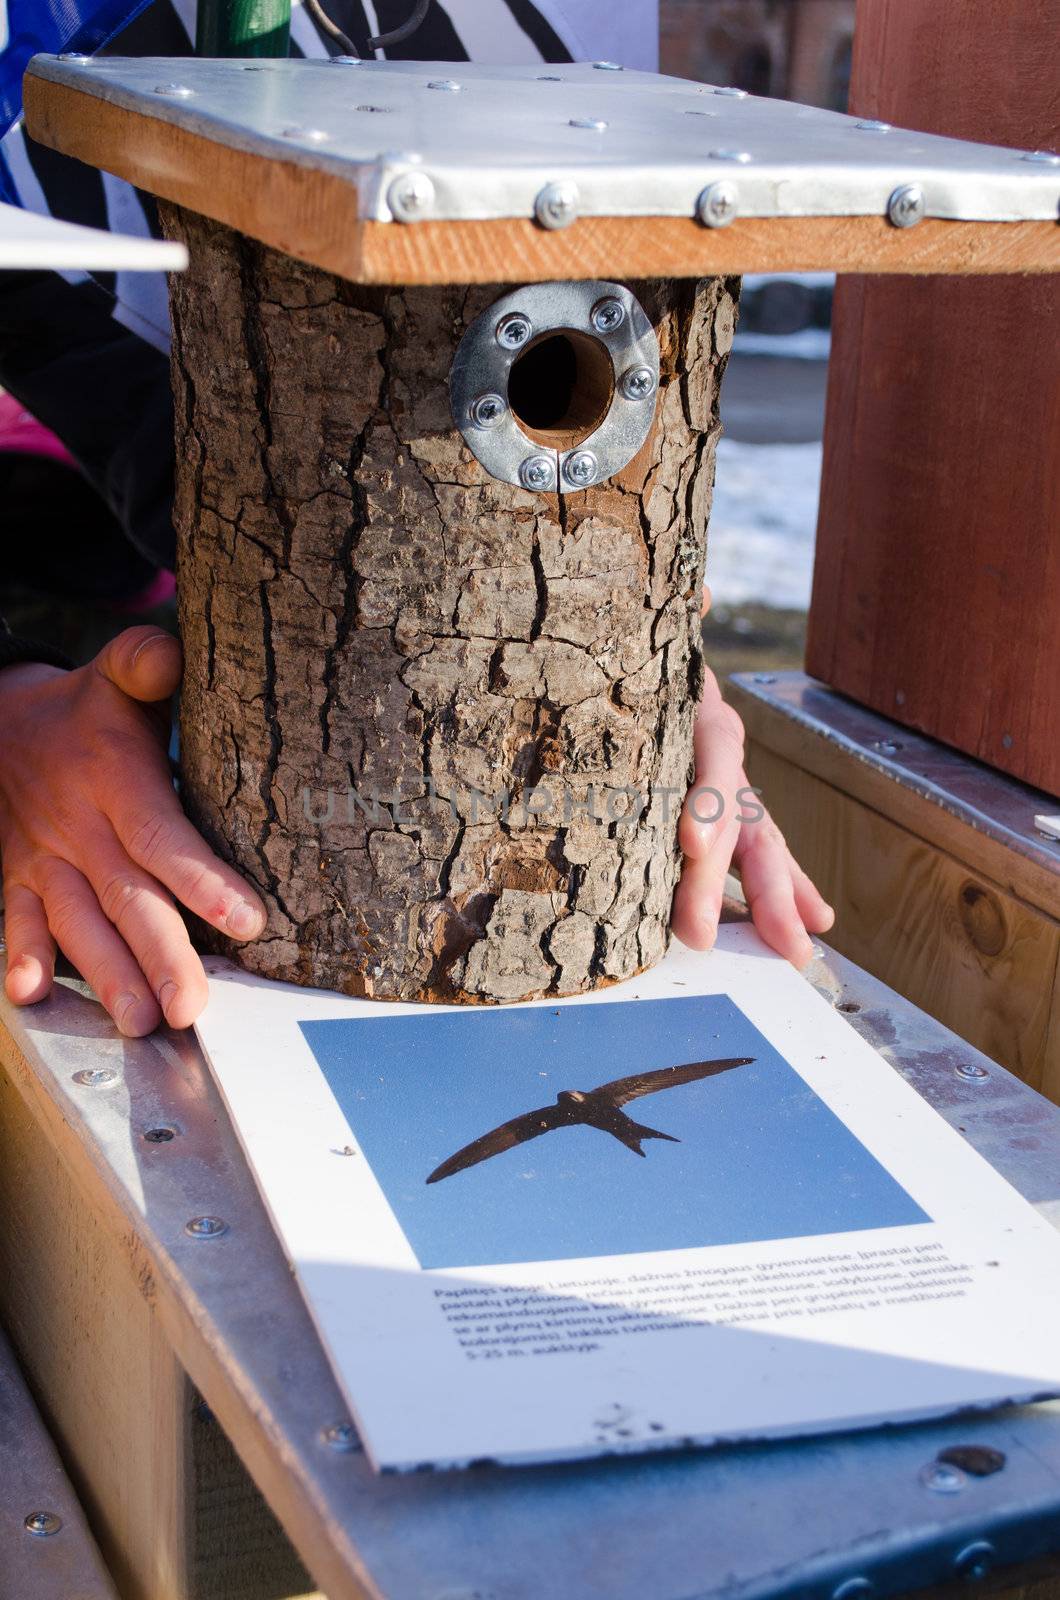 market seller hands hold handmade bird house nesting box made of tree trunk and bird photo for it.